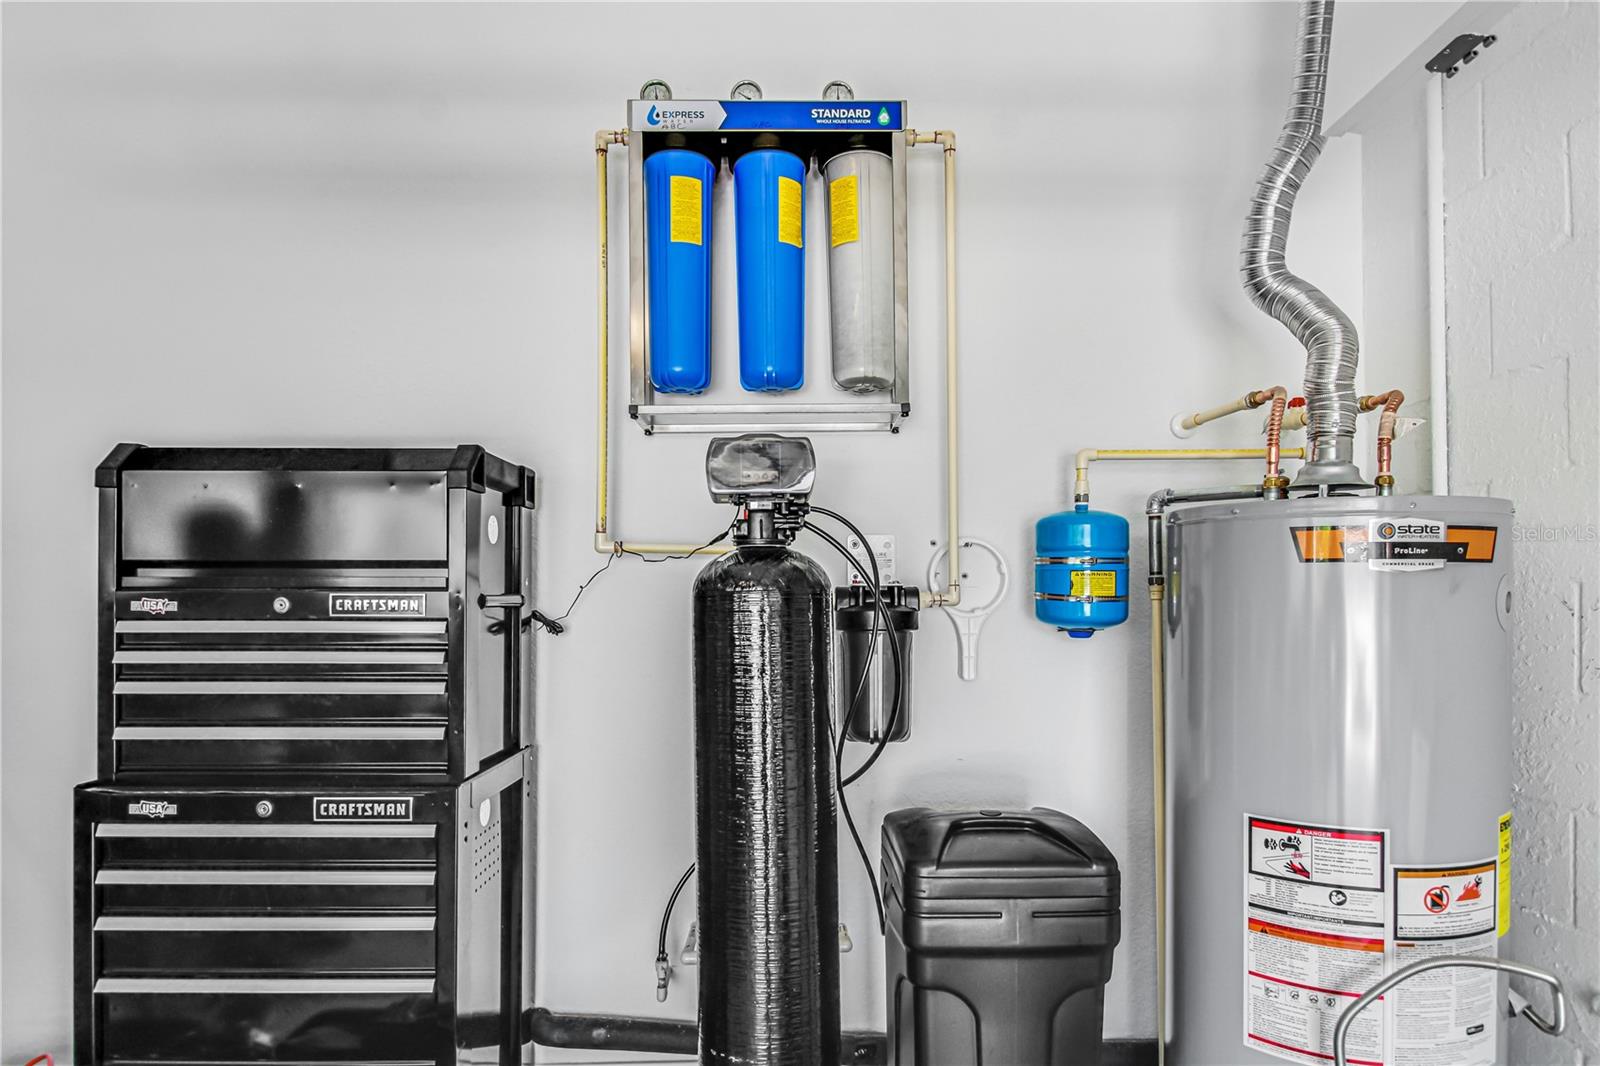 Water filtration system and water softener